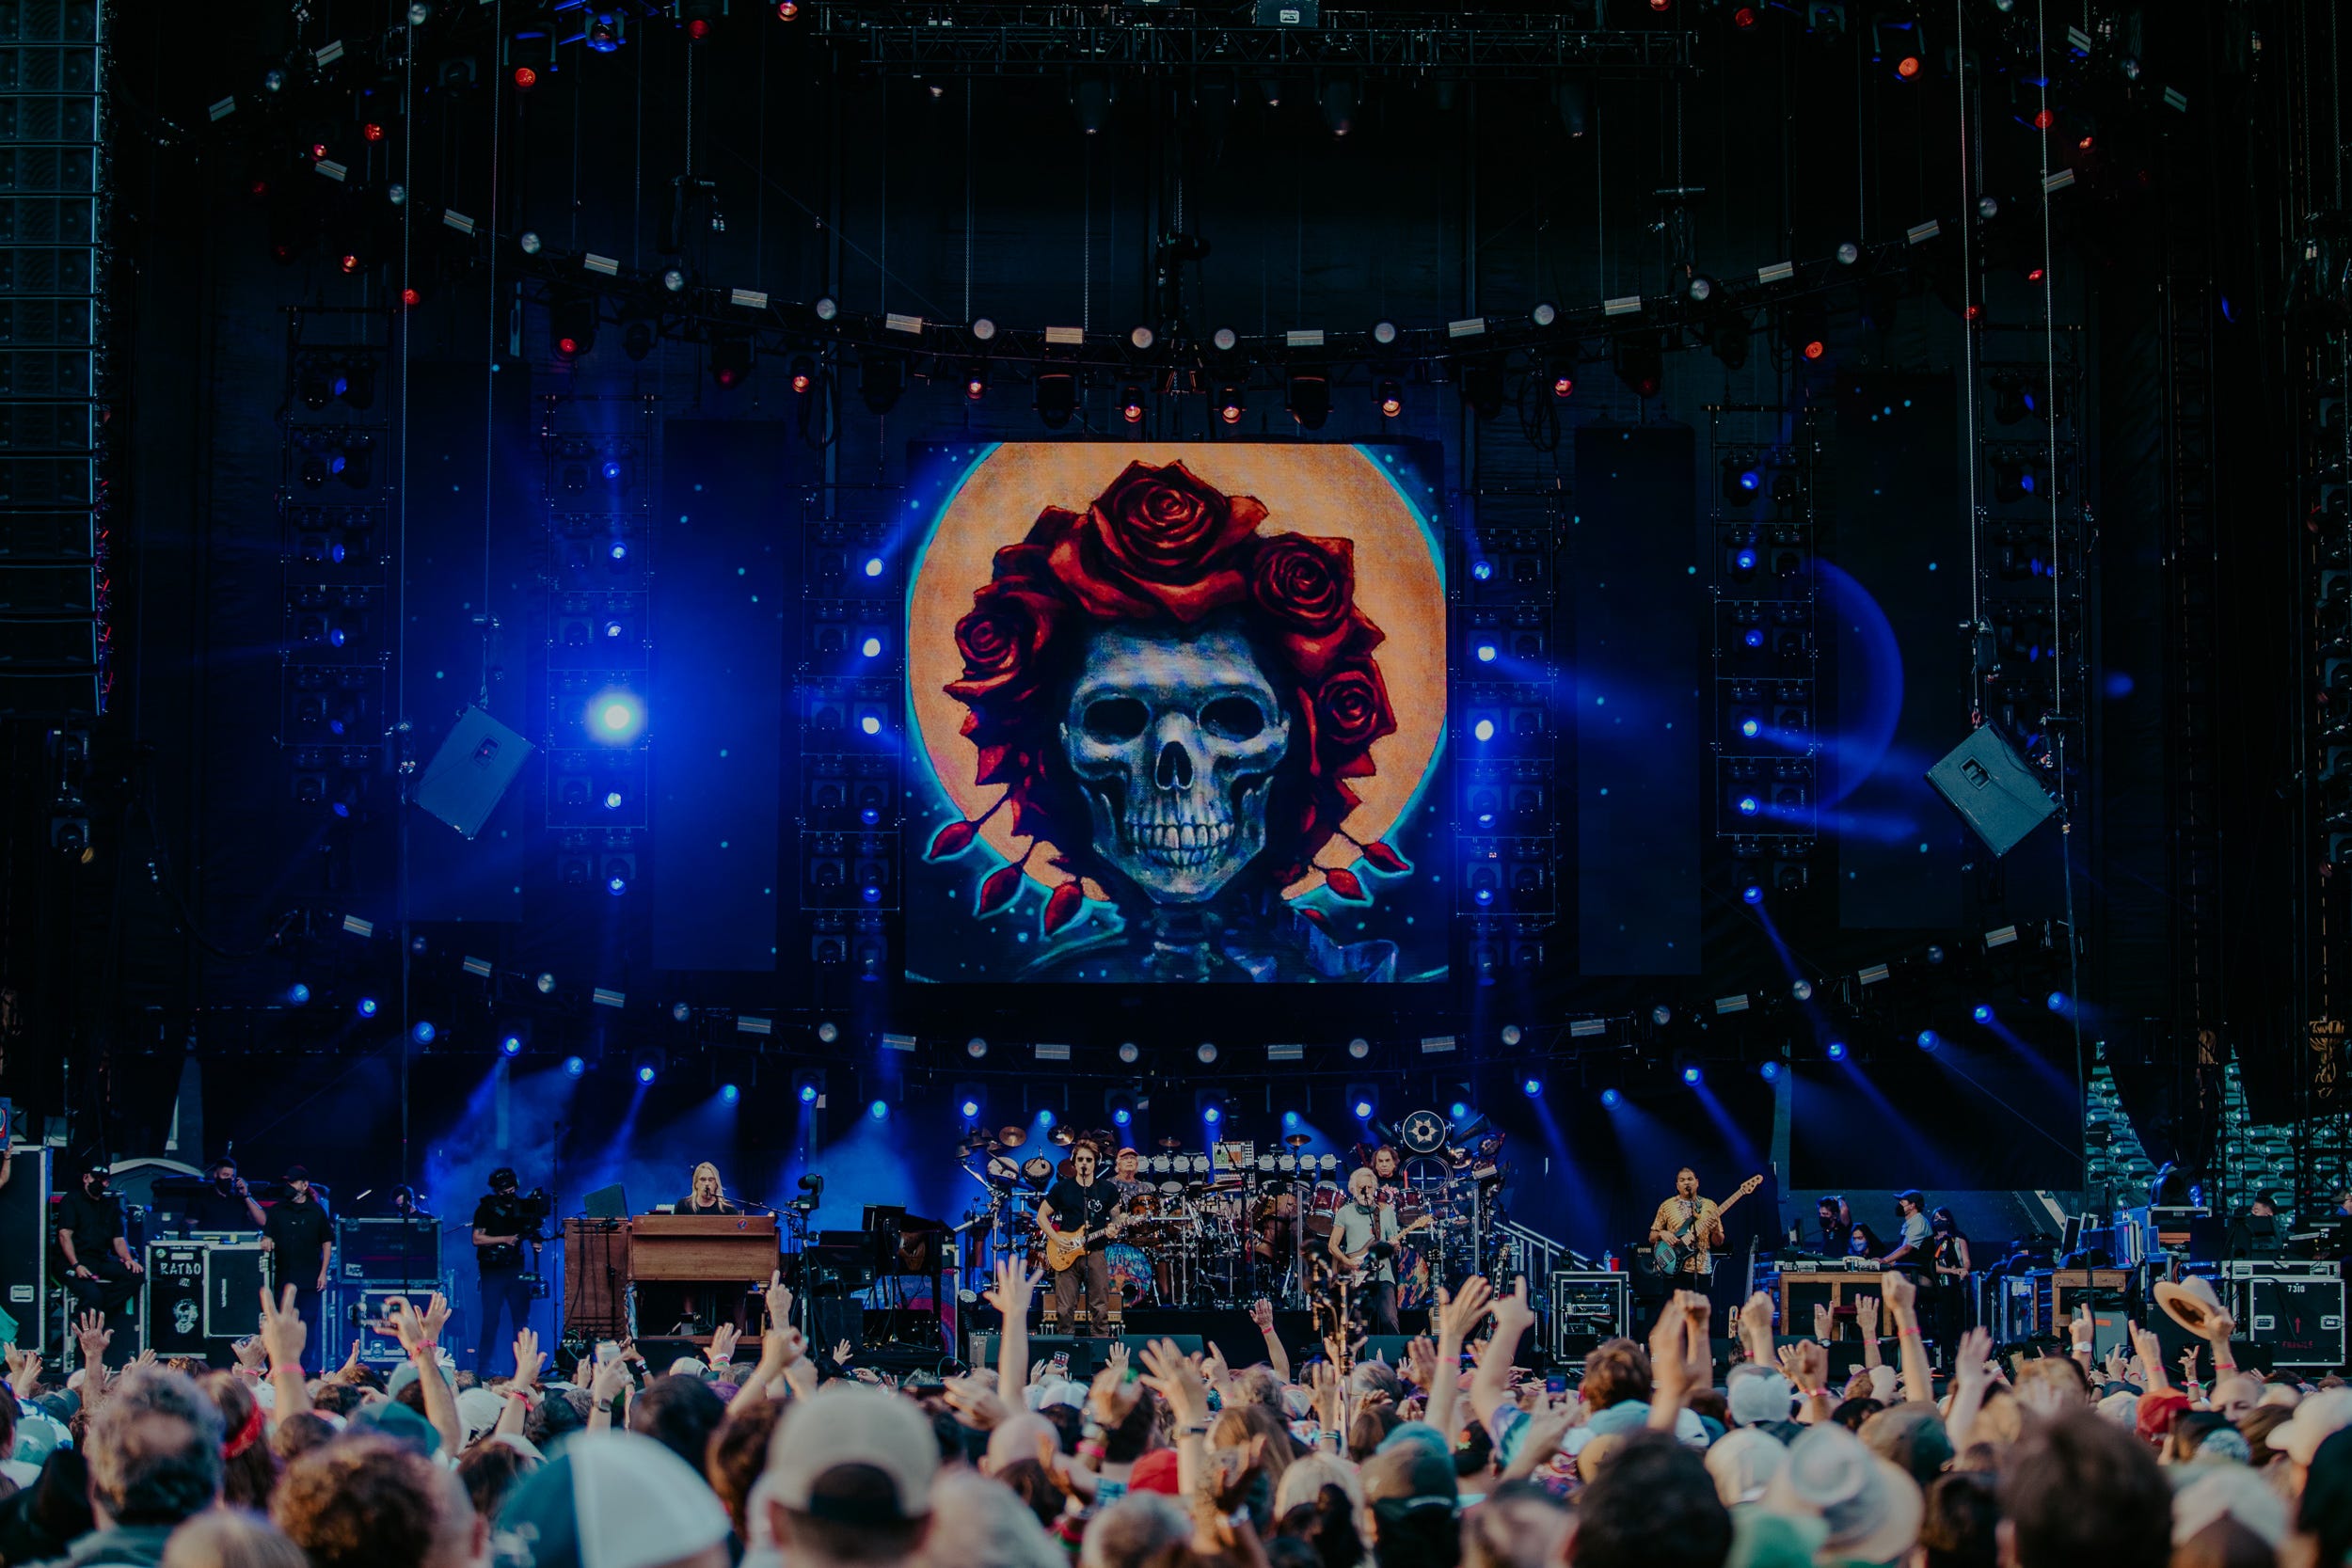 How to watch Dead & Company live stream Band plays final shows in